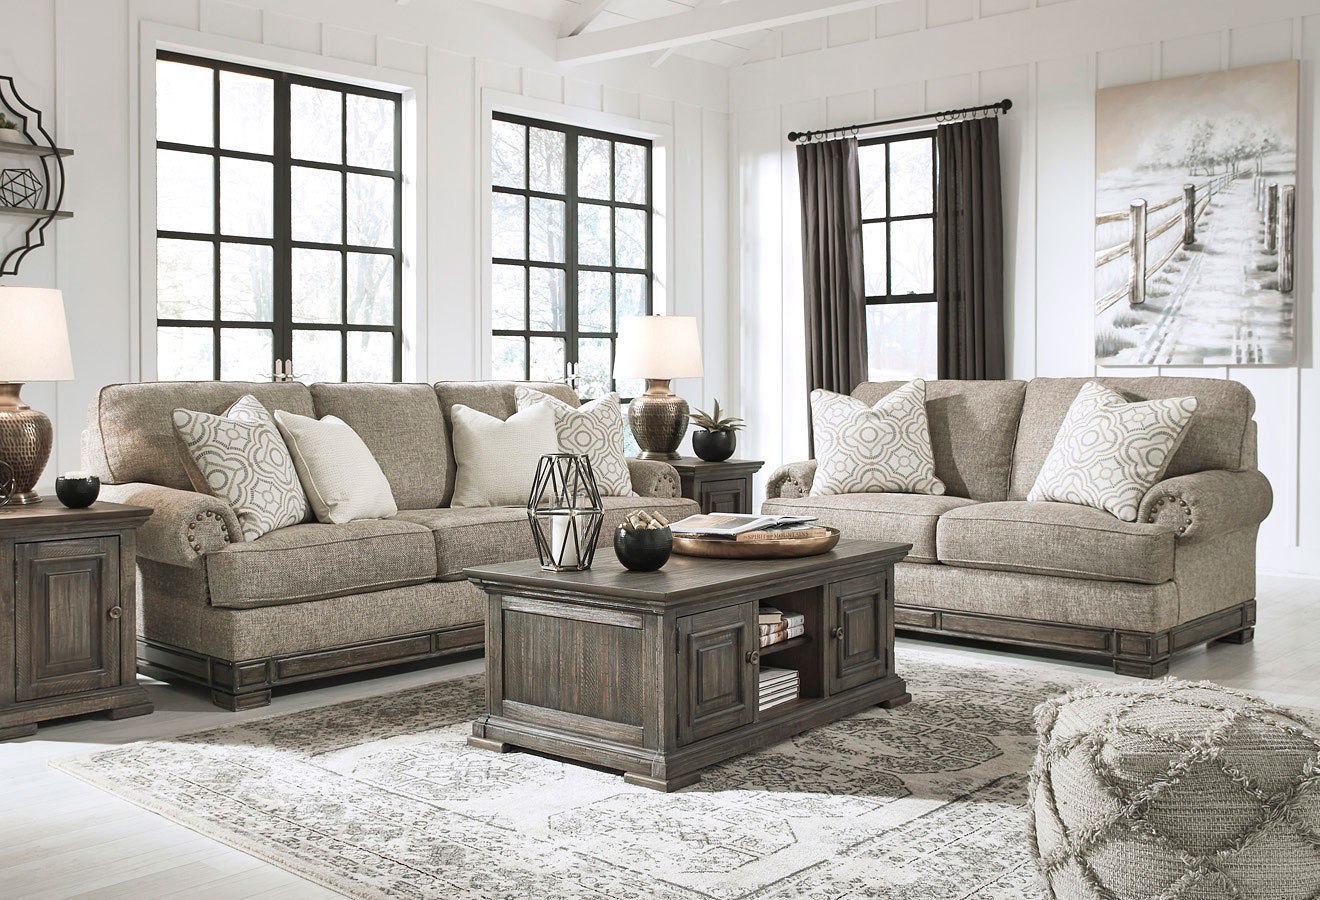 Einsgrove Living Room Set By Signature